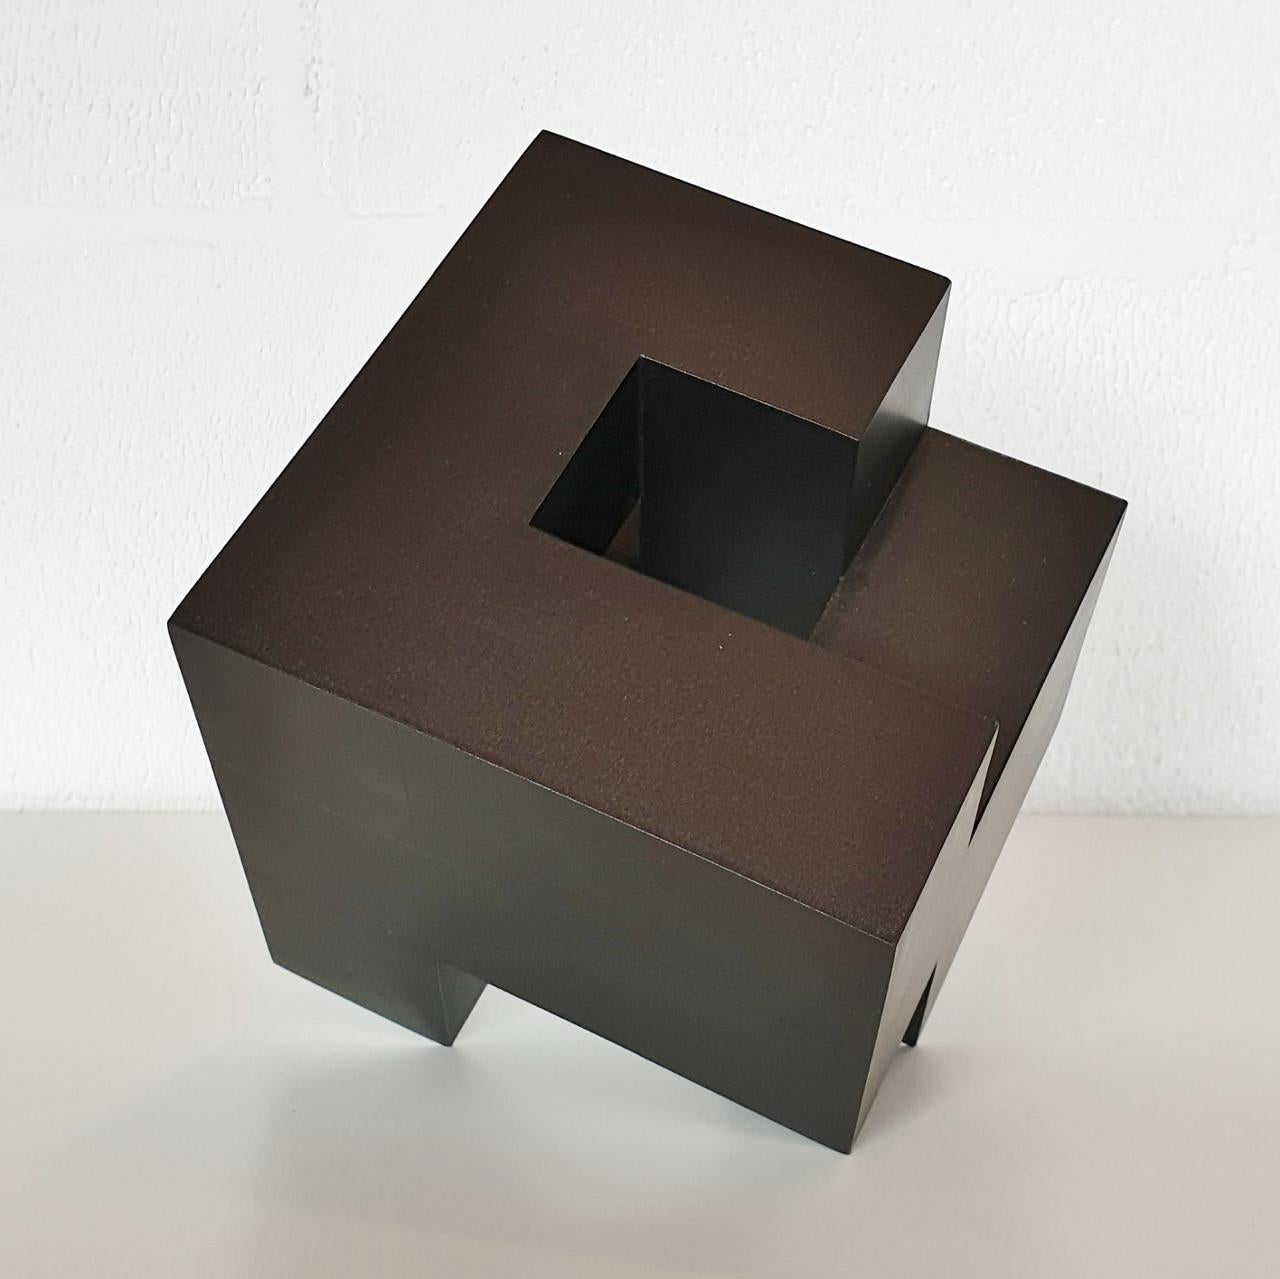 abstract cube architecture model